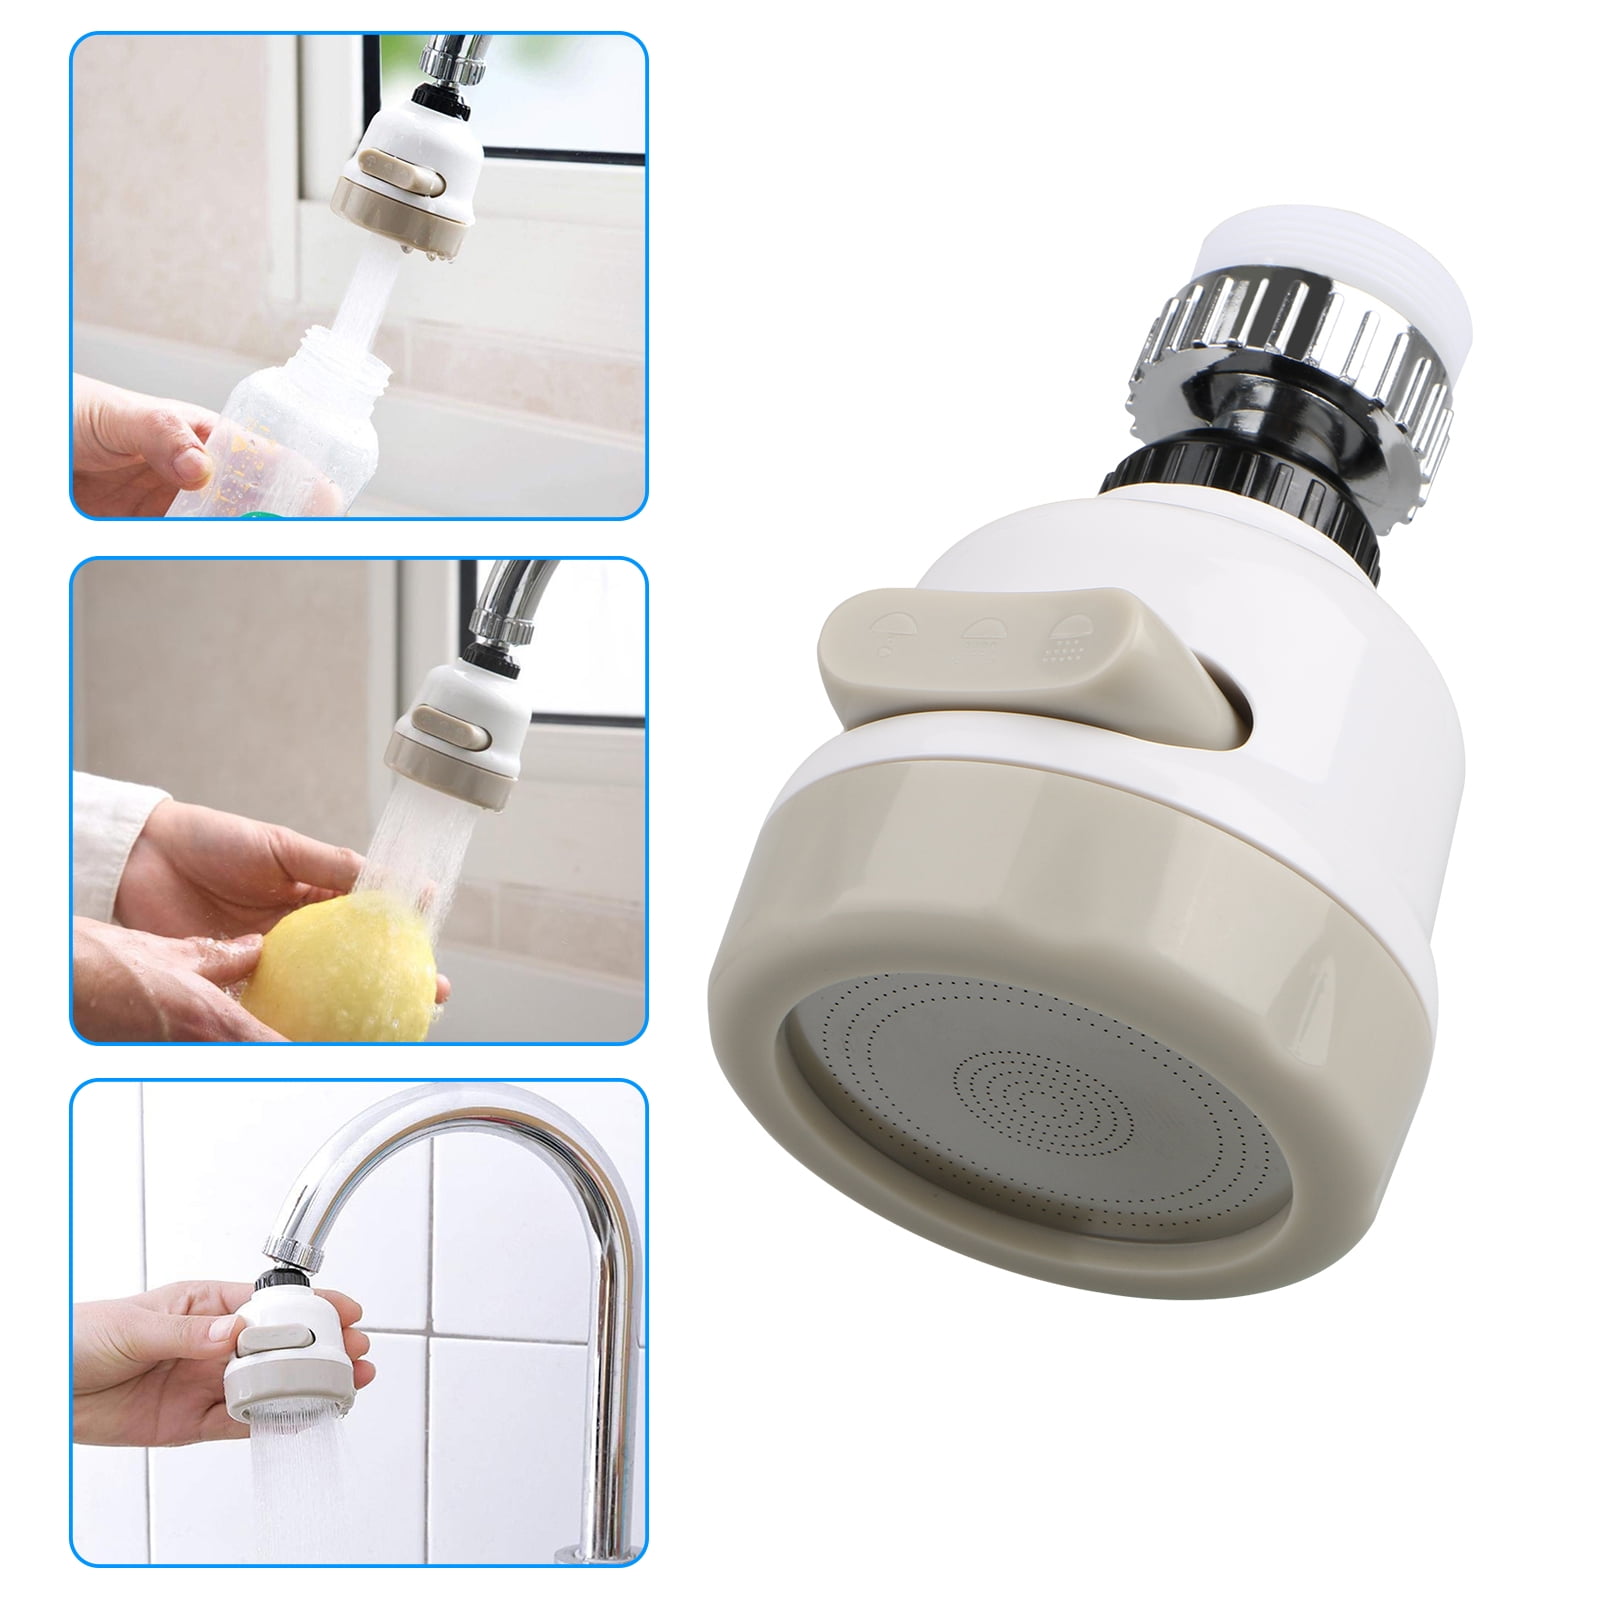 360° Rotatable Tap Head Faucet Water Faucet Extender Splash-Proof Kitchen Tap Sprayer with 2 Modes Water Saving Adjustable Filtration Softener Water Tap Head 